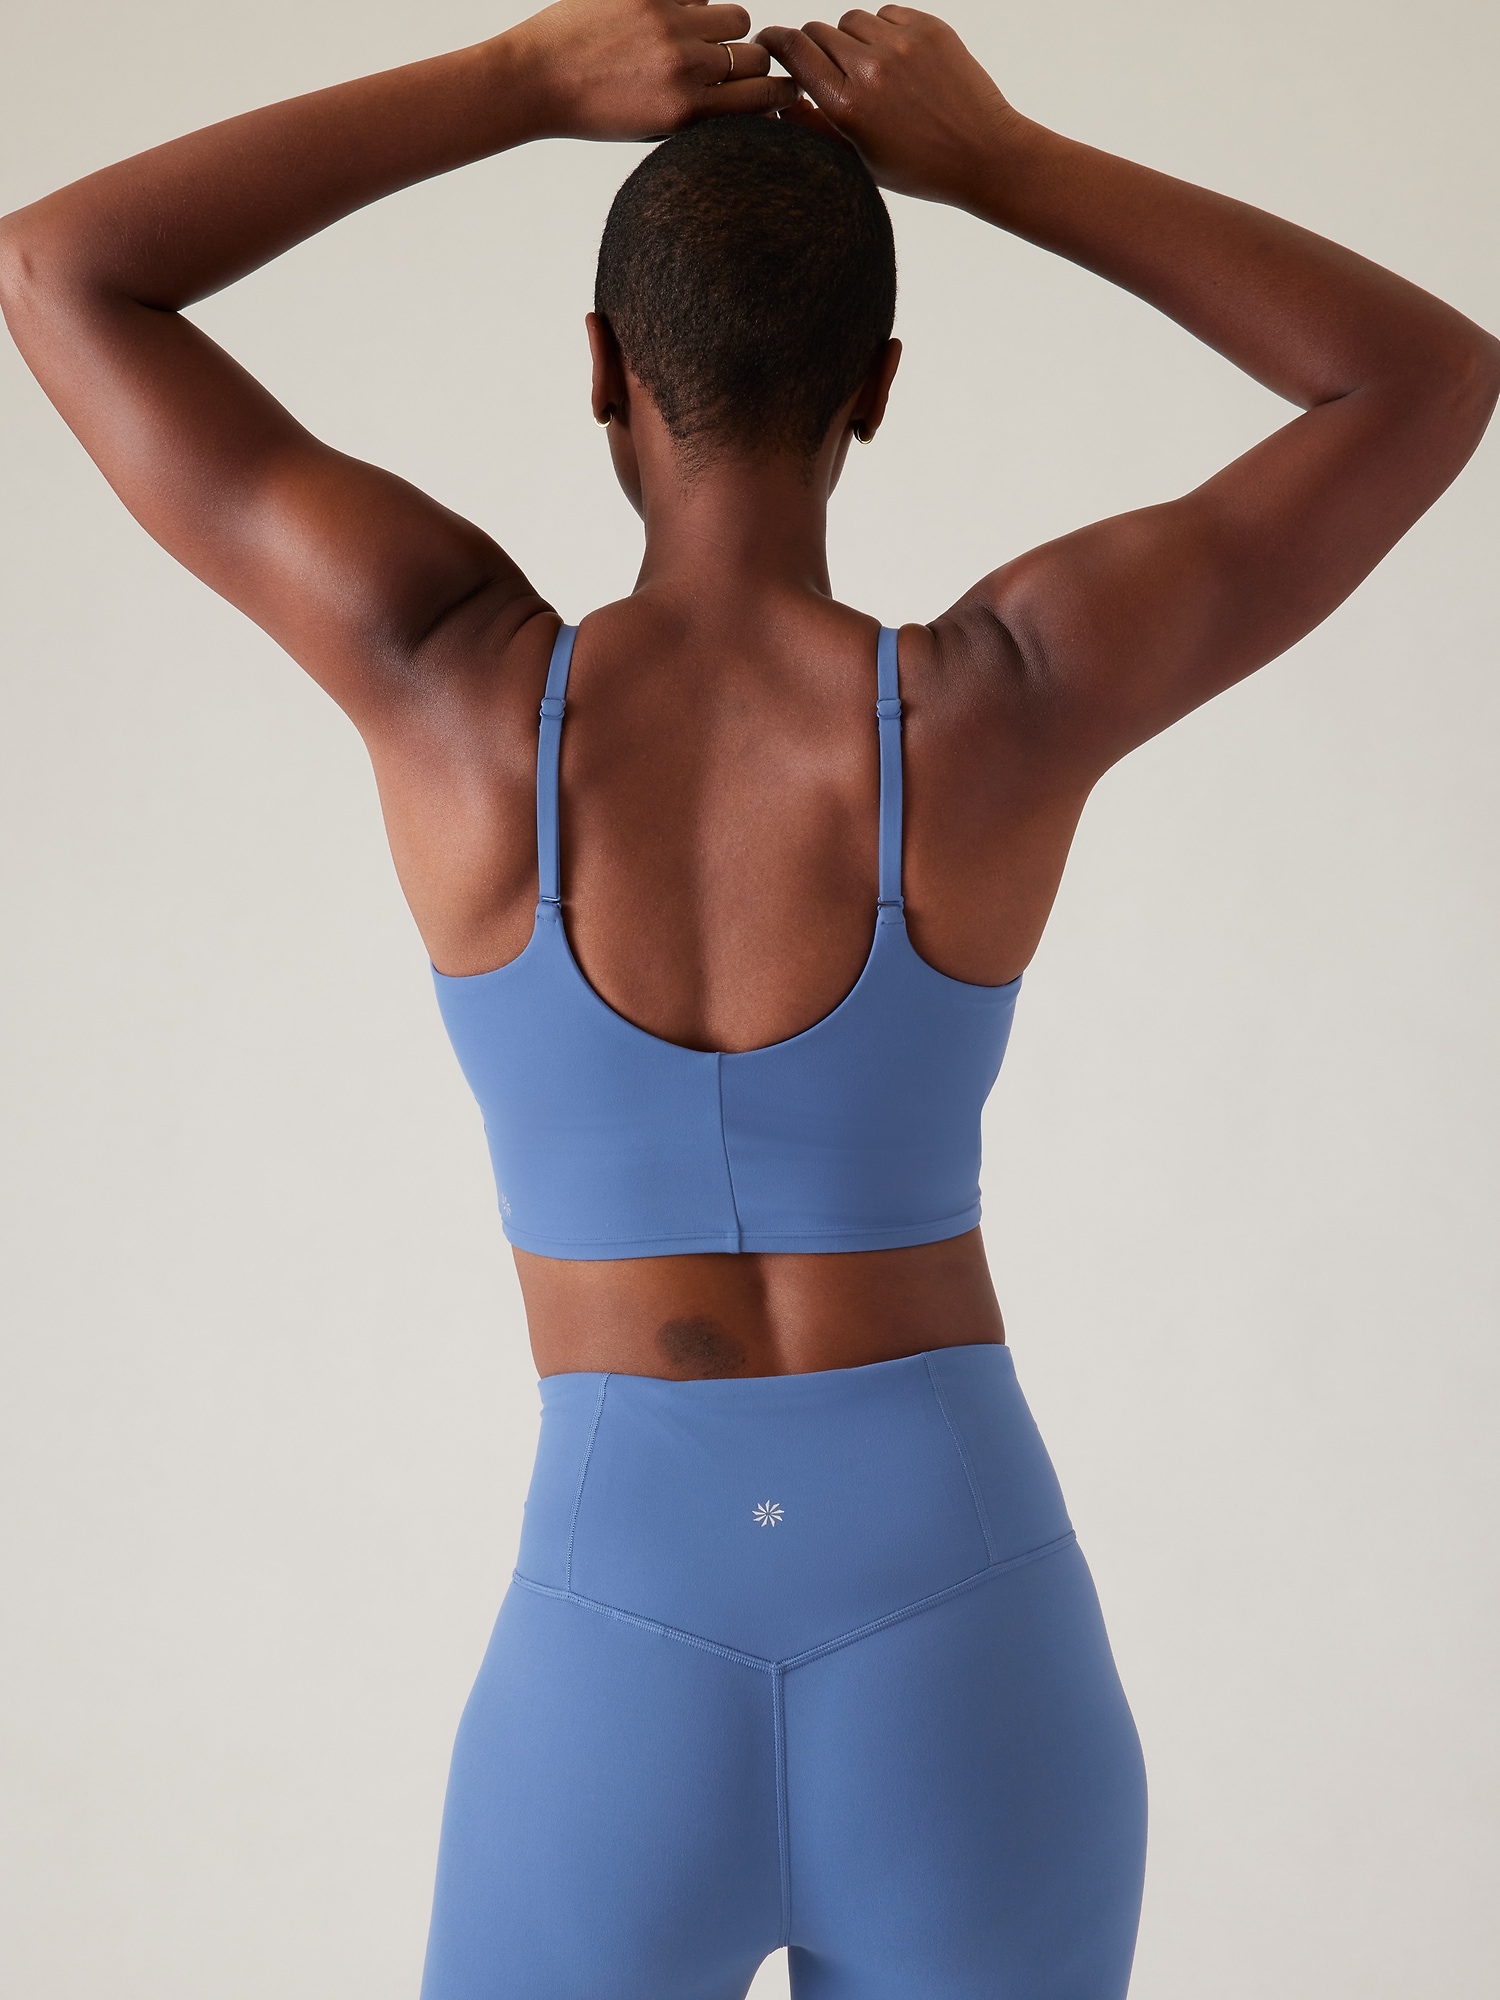 LU149 Shockproof Widen Hem Longline Yoga Bra For Women Push Up Workout  Shirt For Running, Gym, And Fitness Crop Top Brassiere From Rnoq, $19.28